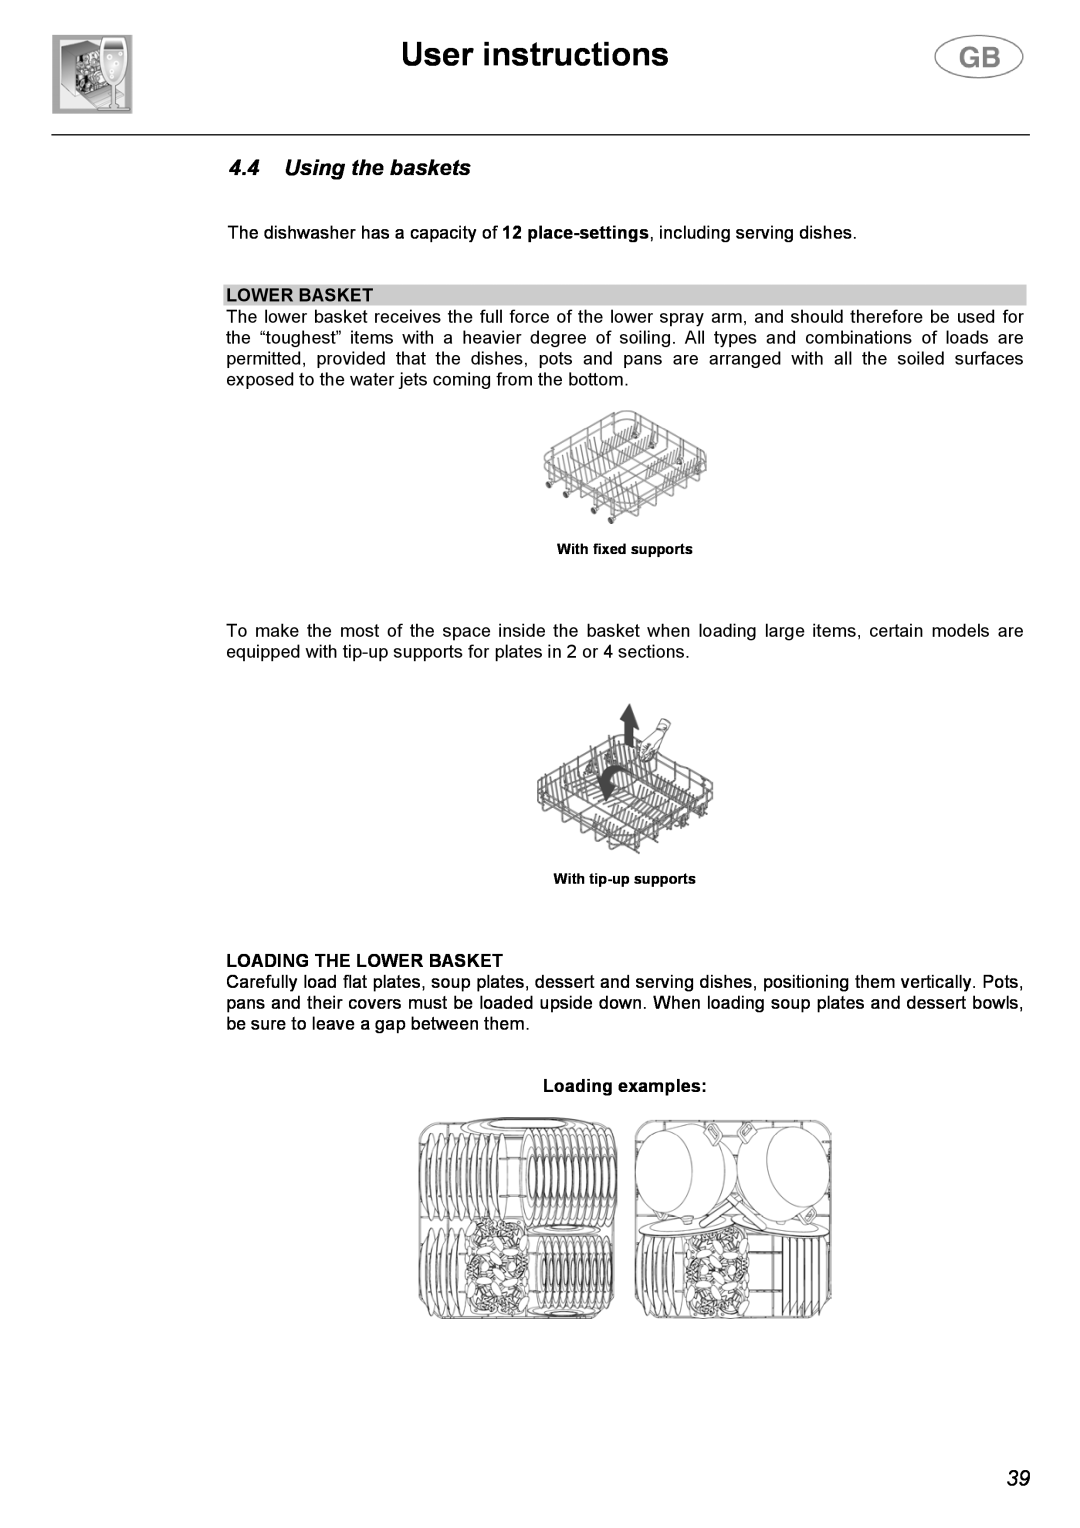 Smeg CA01-1 instruction manual User instructions, 4.4Using the baskets, Loading The Lower Basket, Loading examples 